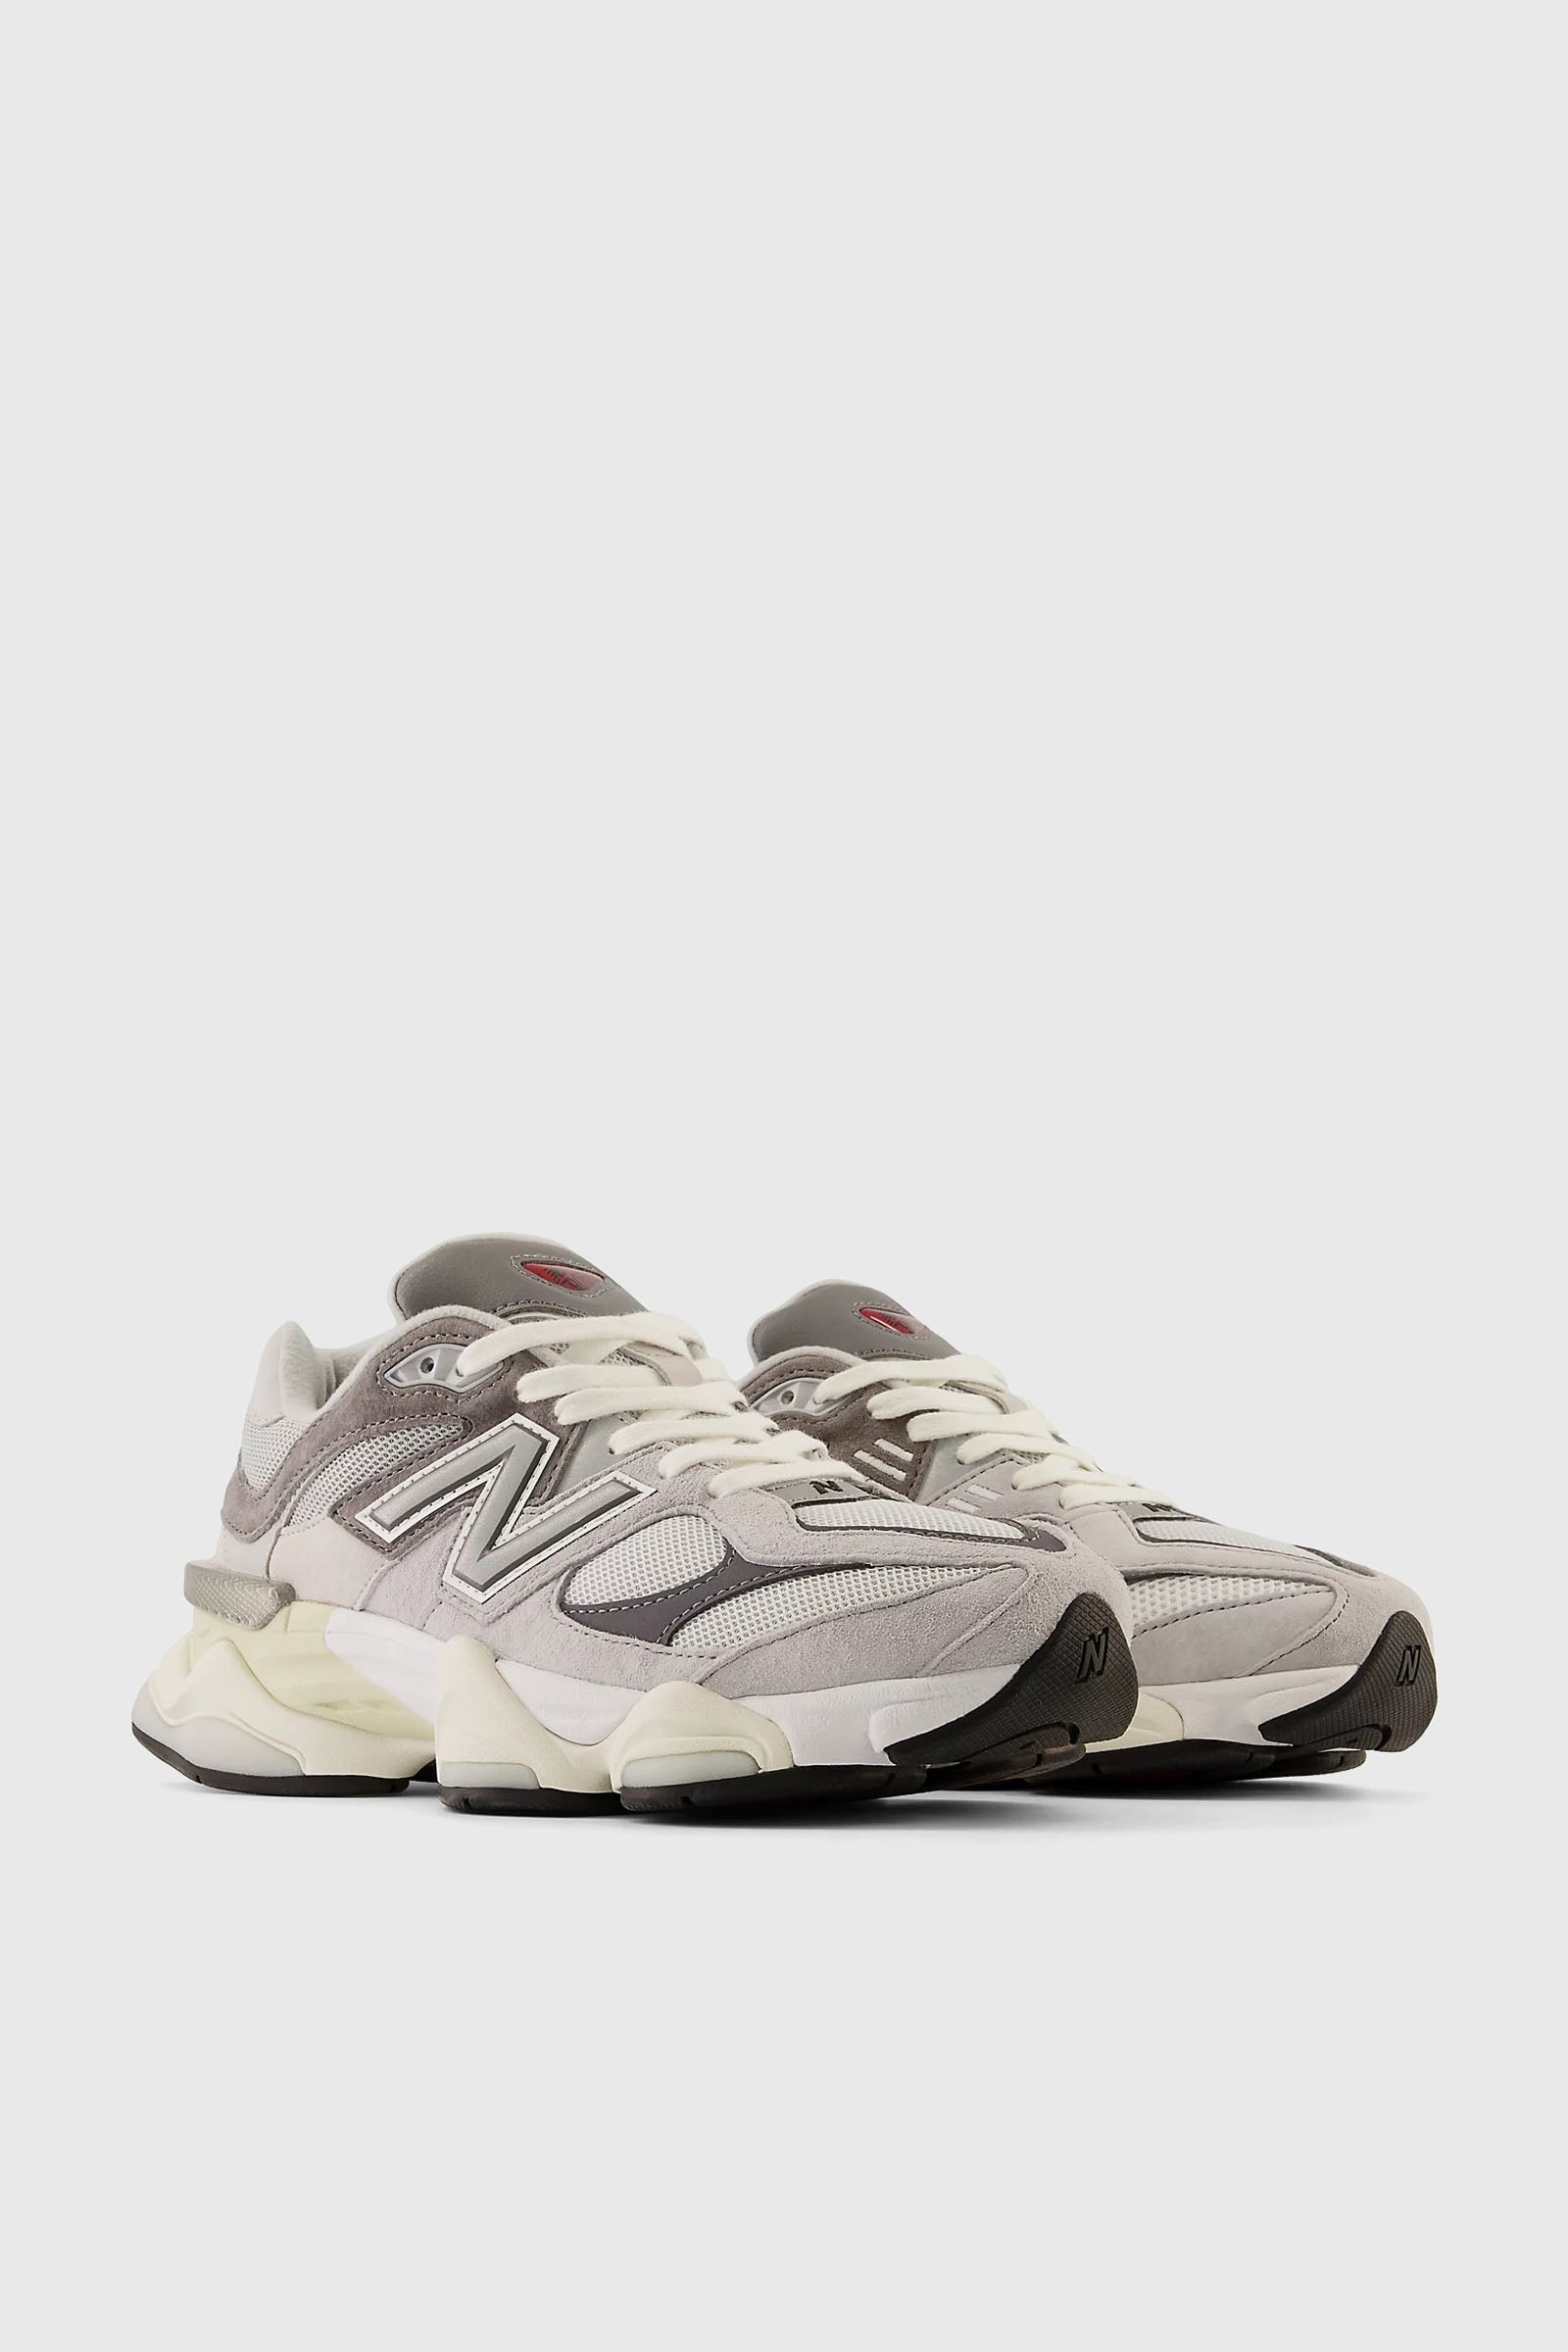 H1 Title: New Balance 9060 Synthetic Grey Sneaker - 2